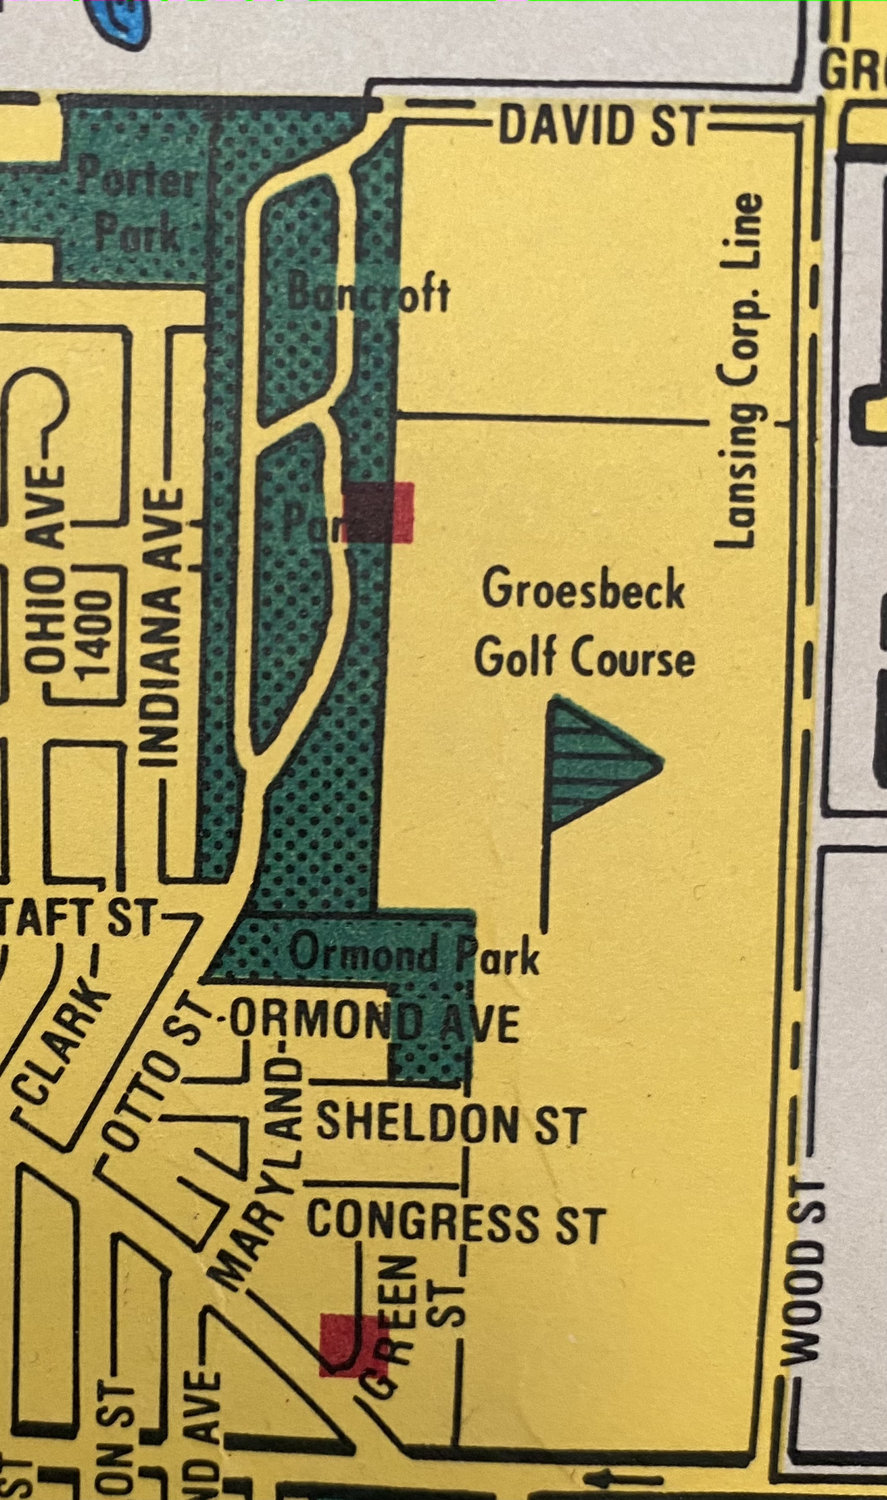 An older map of Greater Lansing shows Bancroft Park, on Lansing’s north side, whose entrance is from Otto Street off of Cesar Chavez Avenue. Adjacent Ormond Park is smaller now because of a new entrance on the southern end of Groesbeck Golf Course.